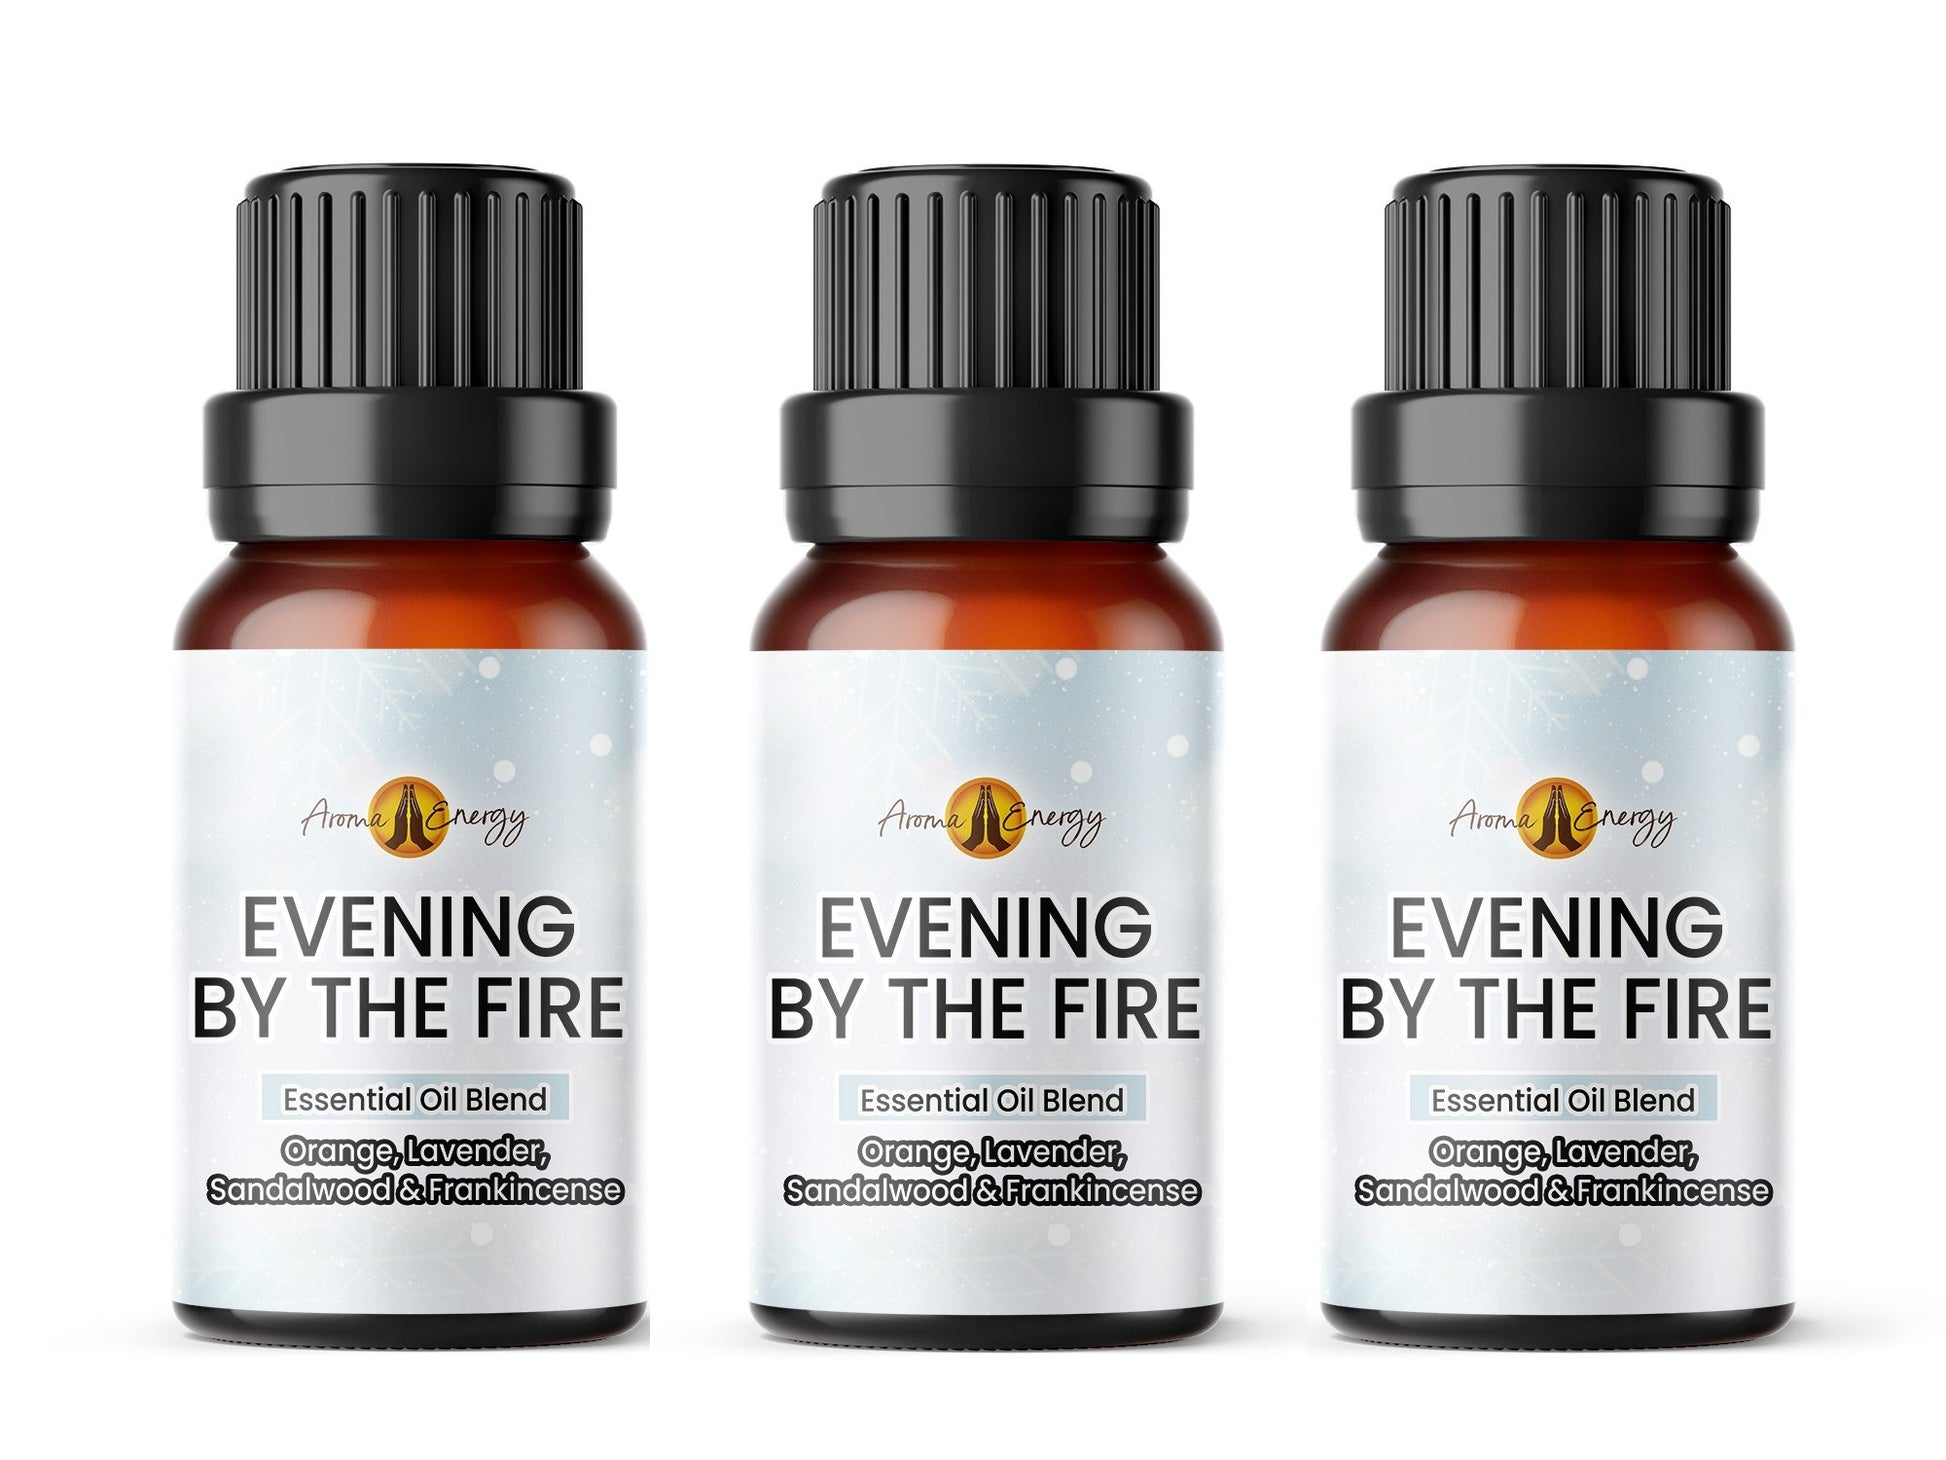 Evening By The Fire Essential Oil Blend - Aroma Energy